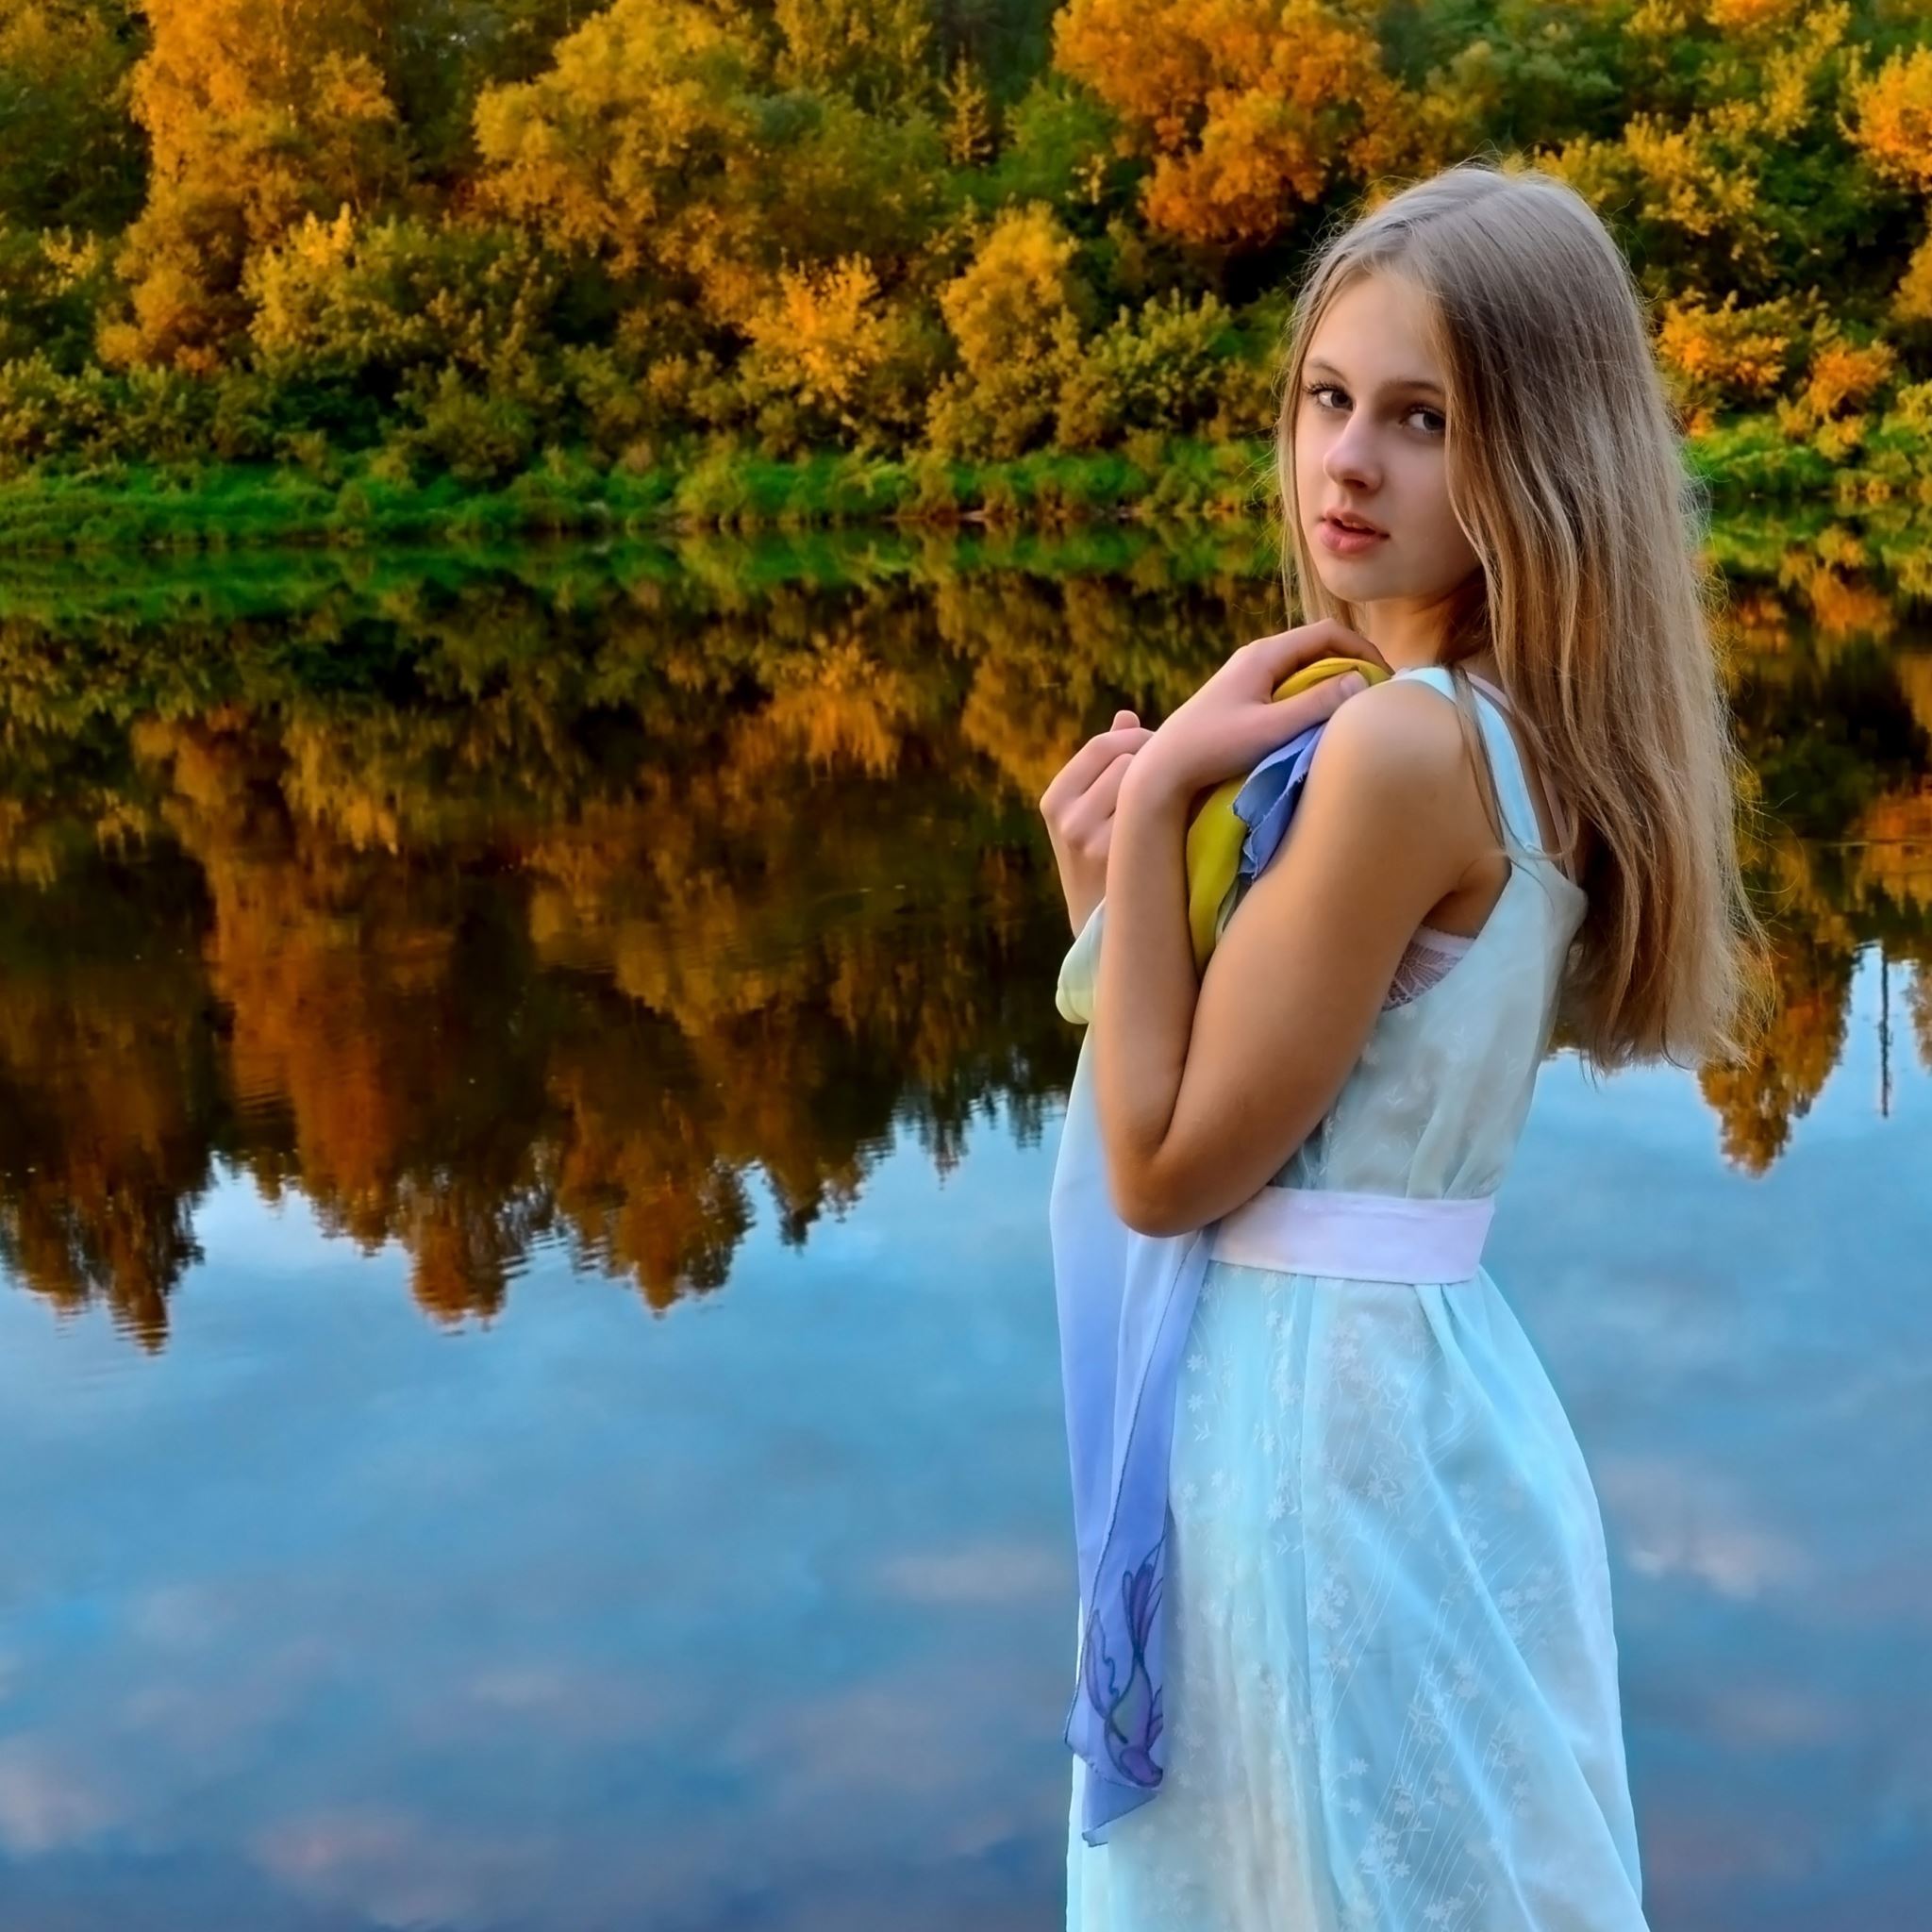 Girl and landscape iPad Air wallpaper 